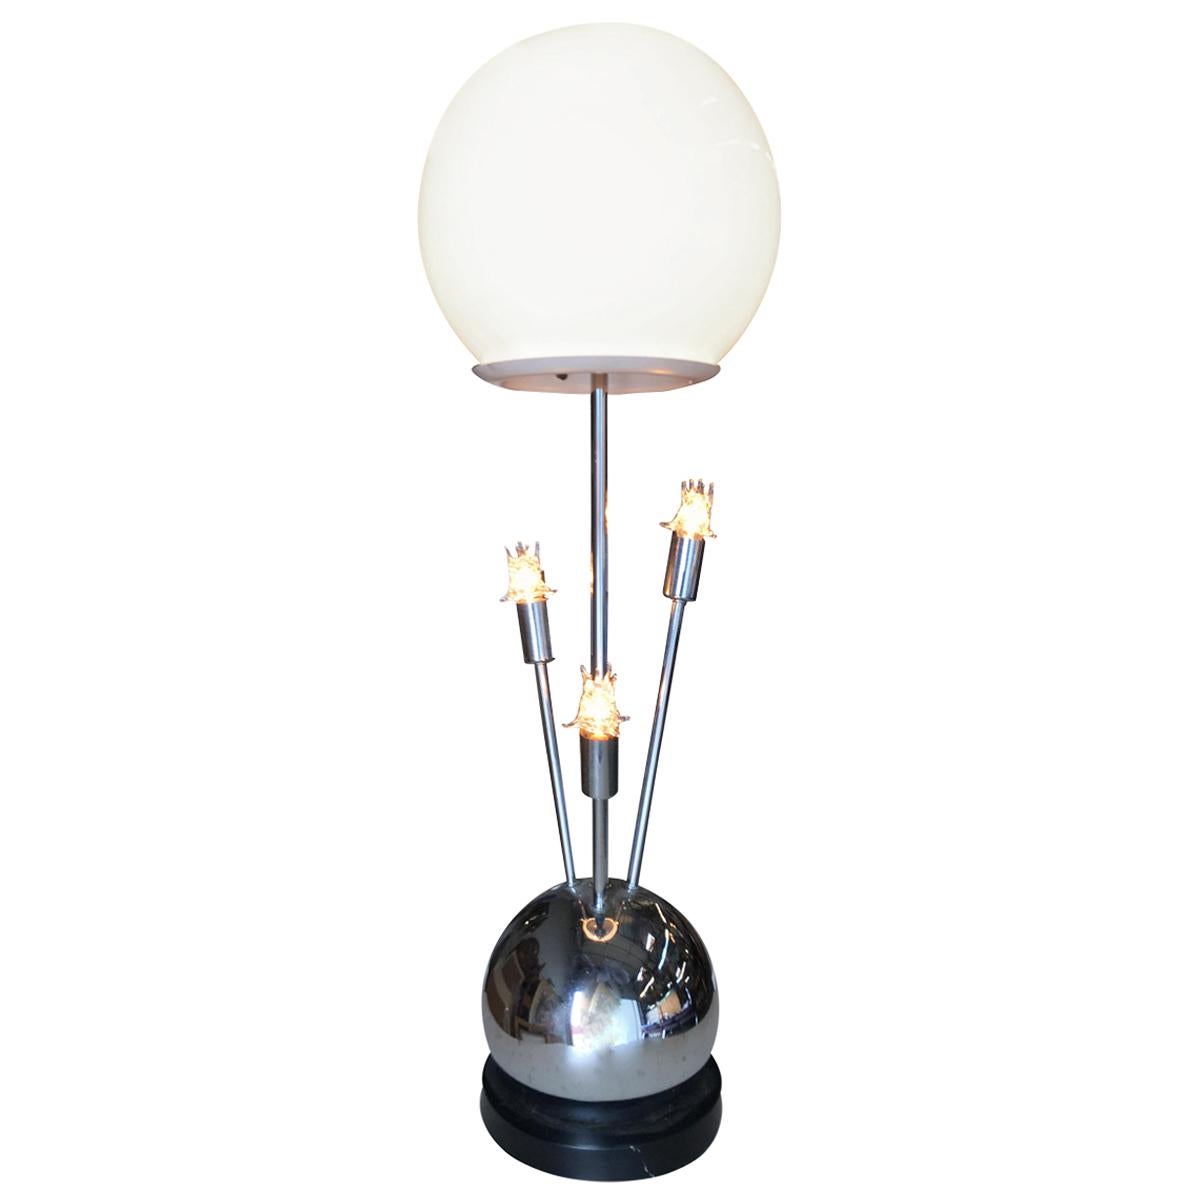 Space Age Chrome Ball Table Lamp with Fours Lights, Attributed to Torino For Sale